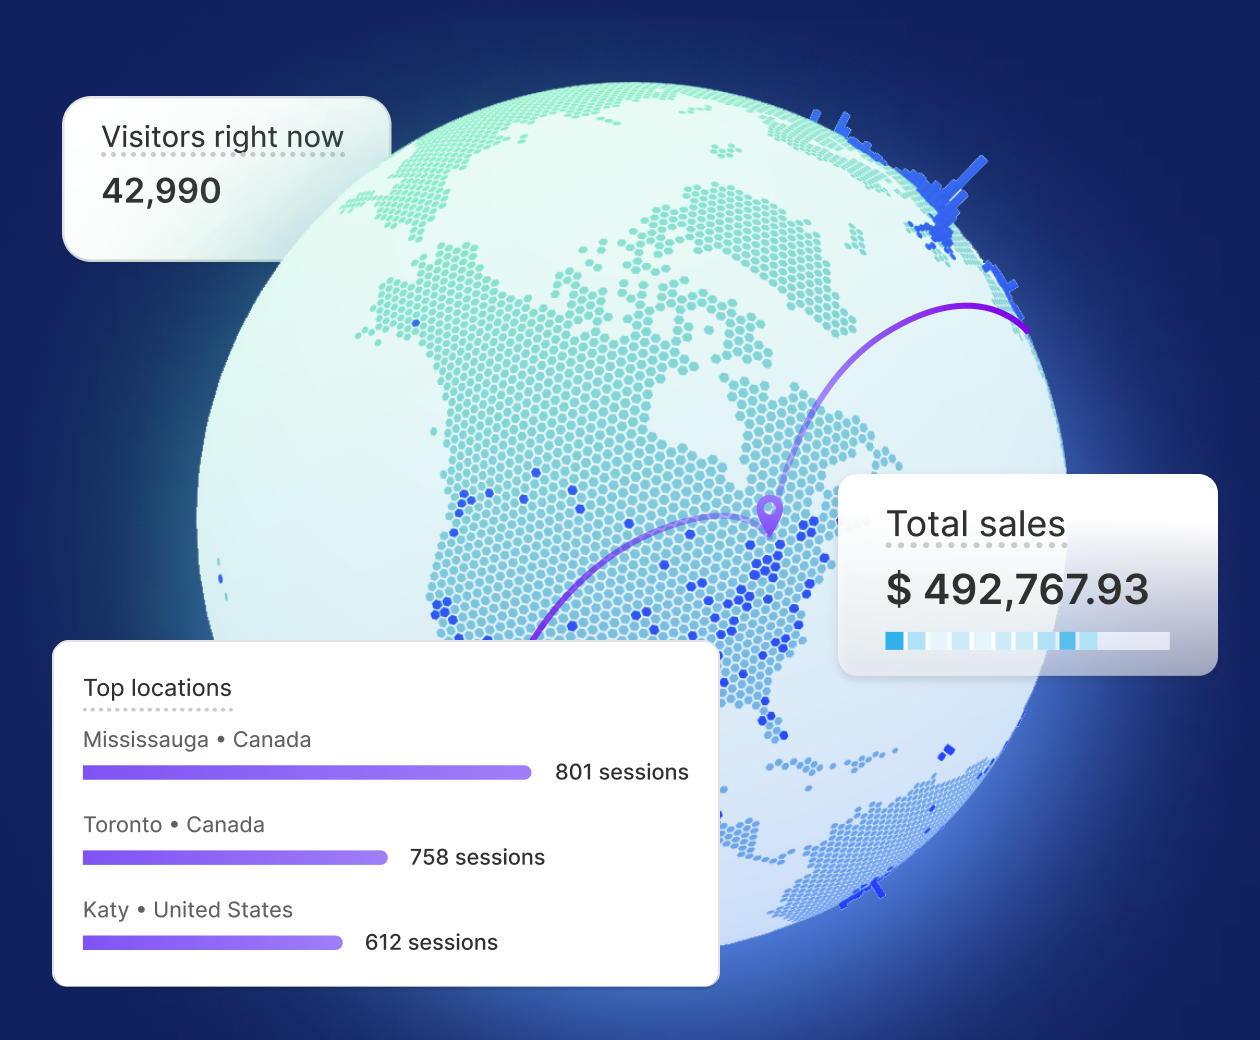 A collage of images from the Live View screen shows the globe, top locations, total sales, and visitors right now modules.